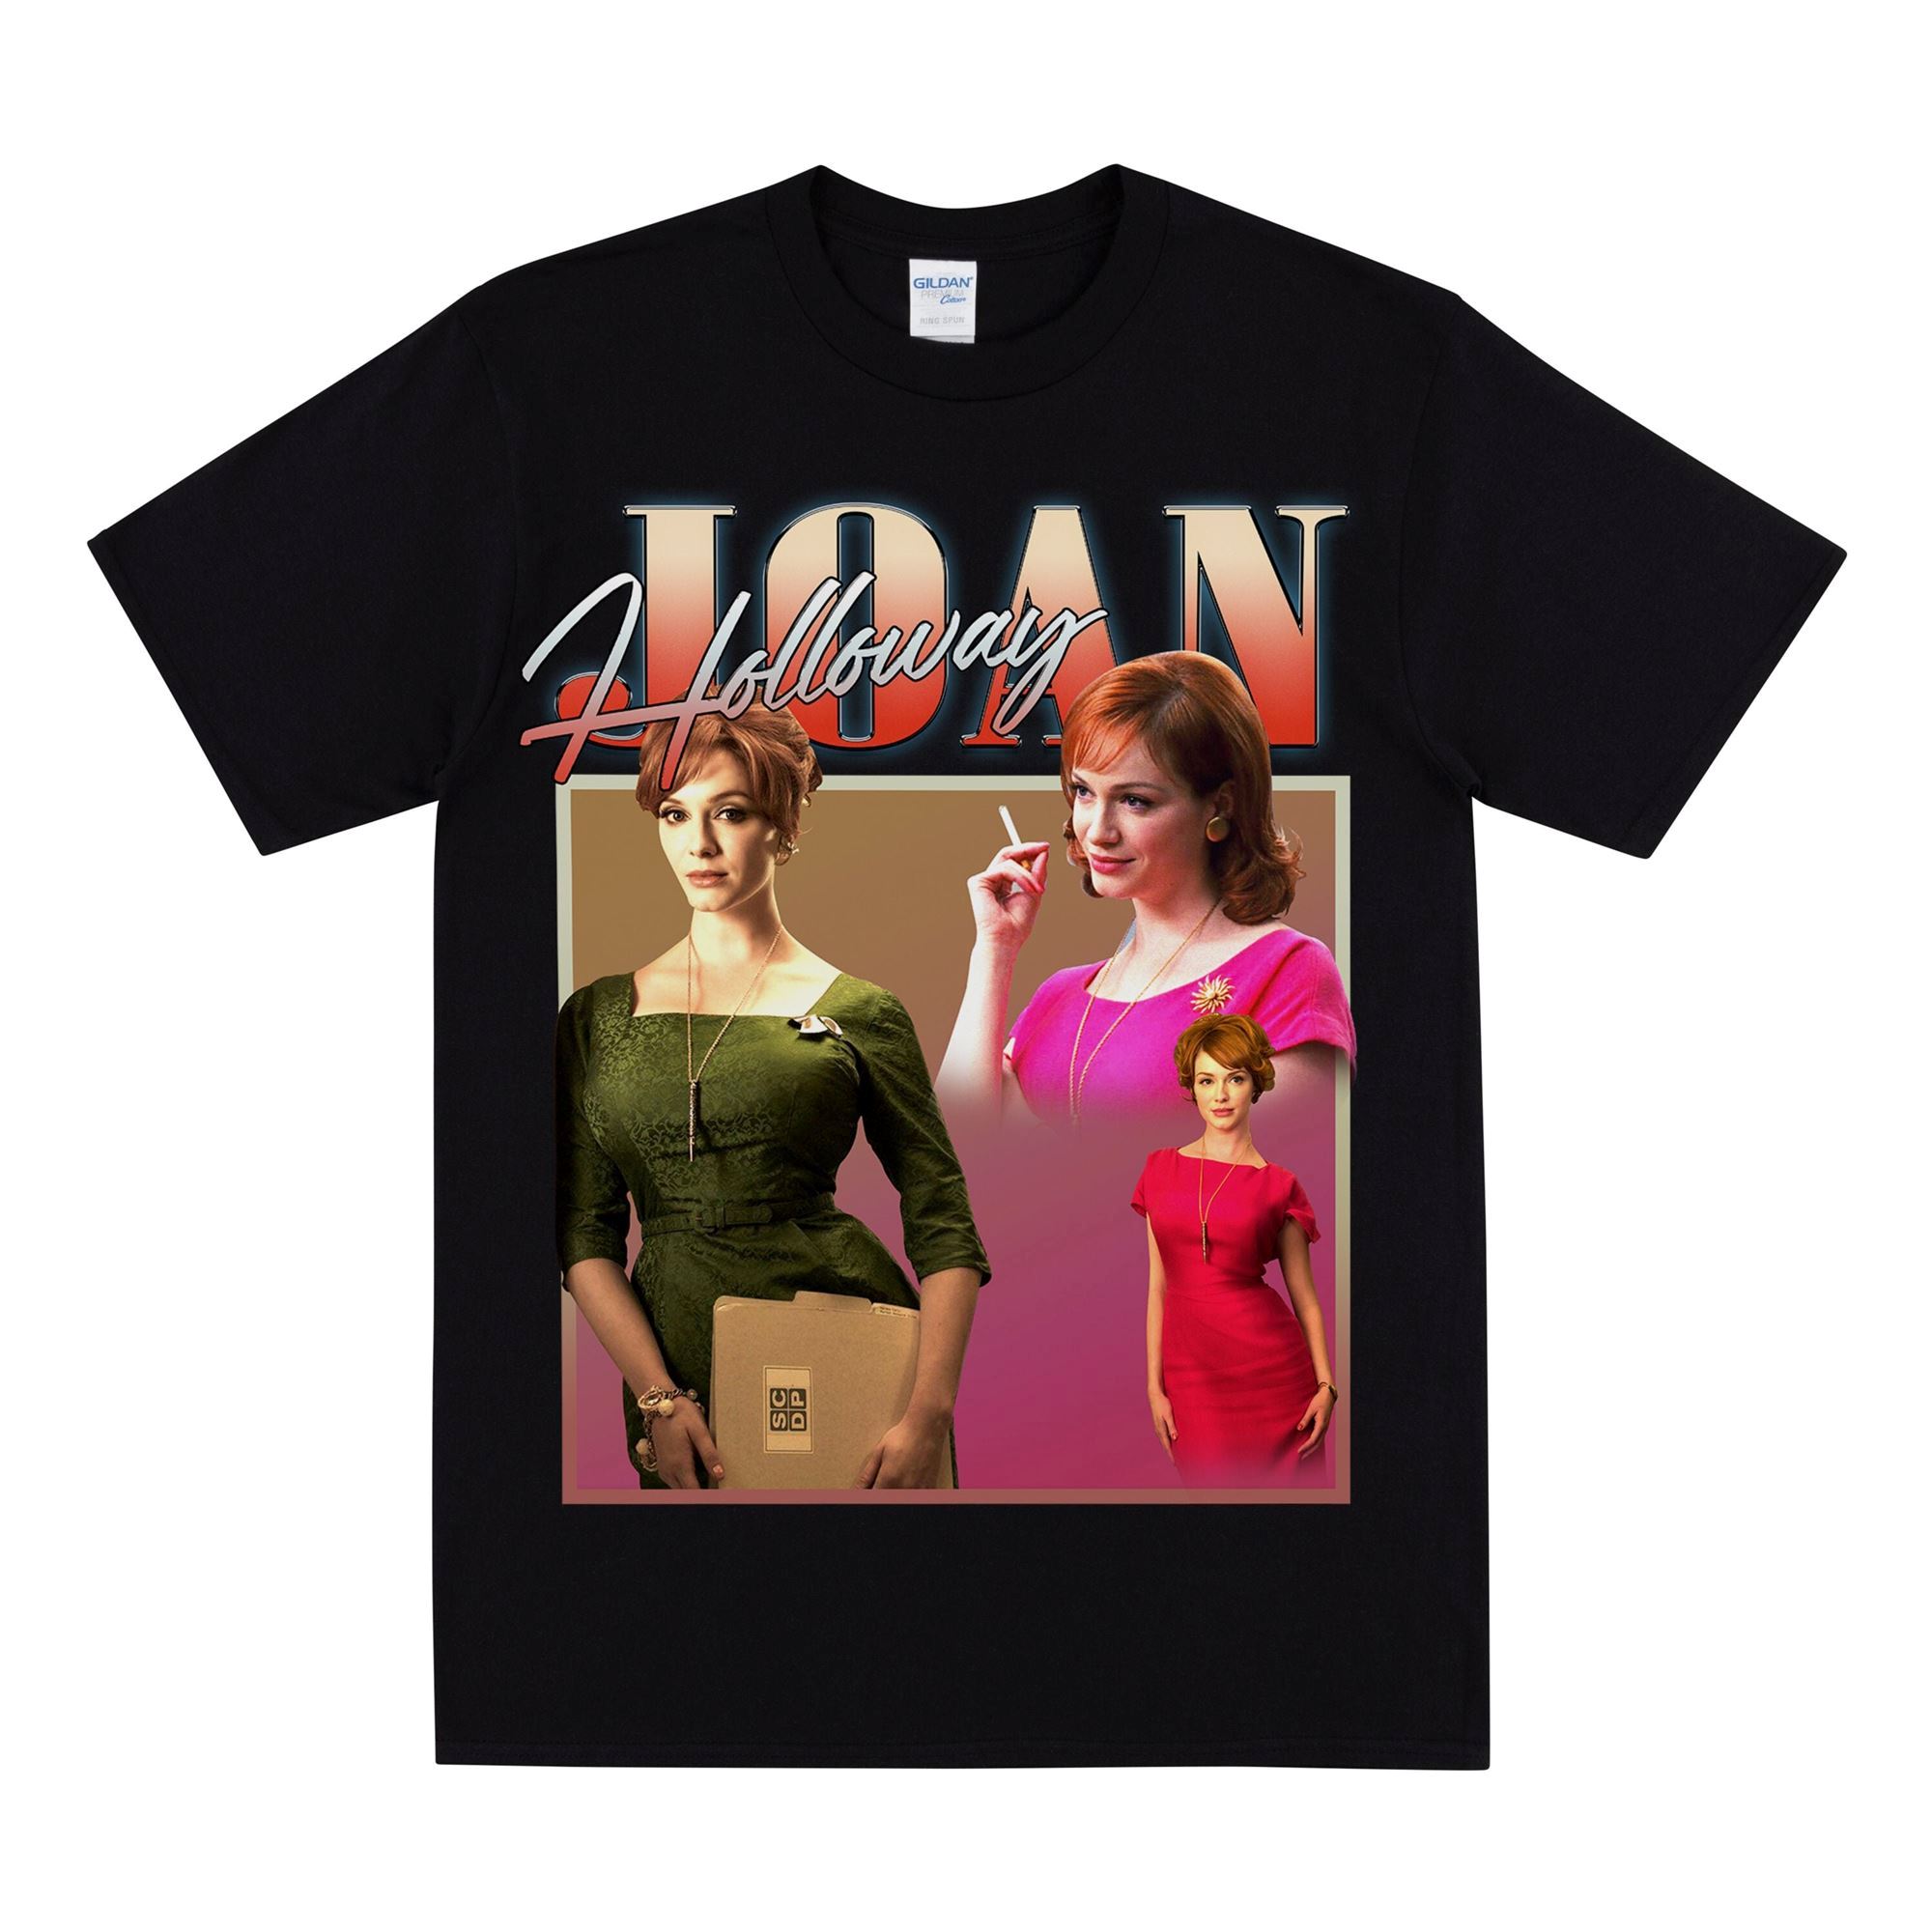 Limited Editon Vintage Joan Holloway From Mad Men T-shirt 1950s Pin Up Girl Art Style 60s New York Inspired Tv Series 